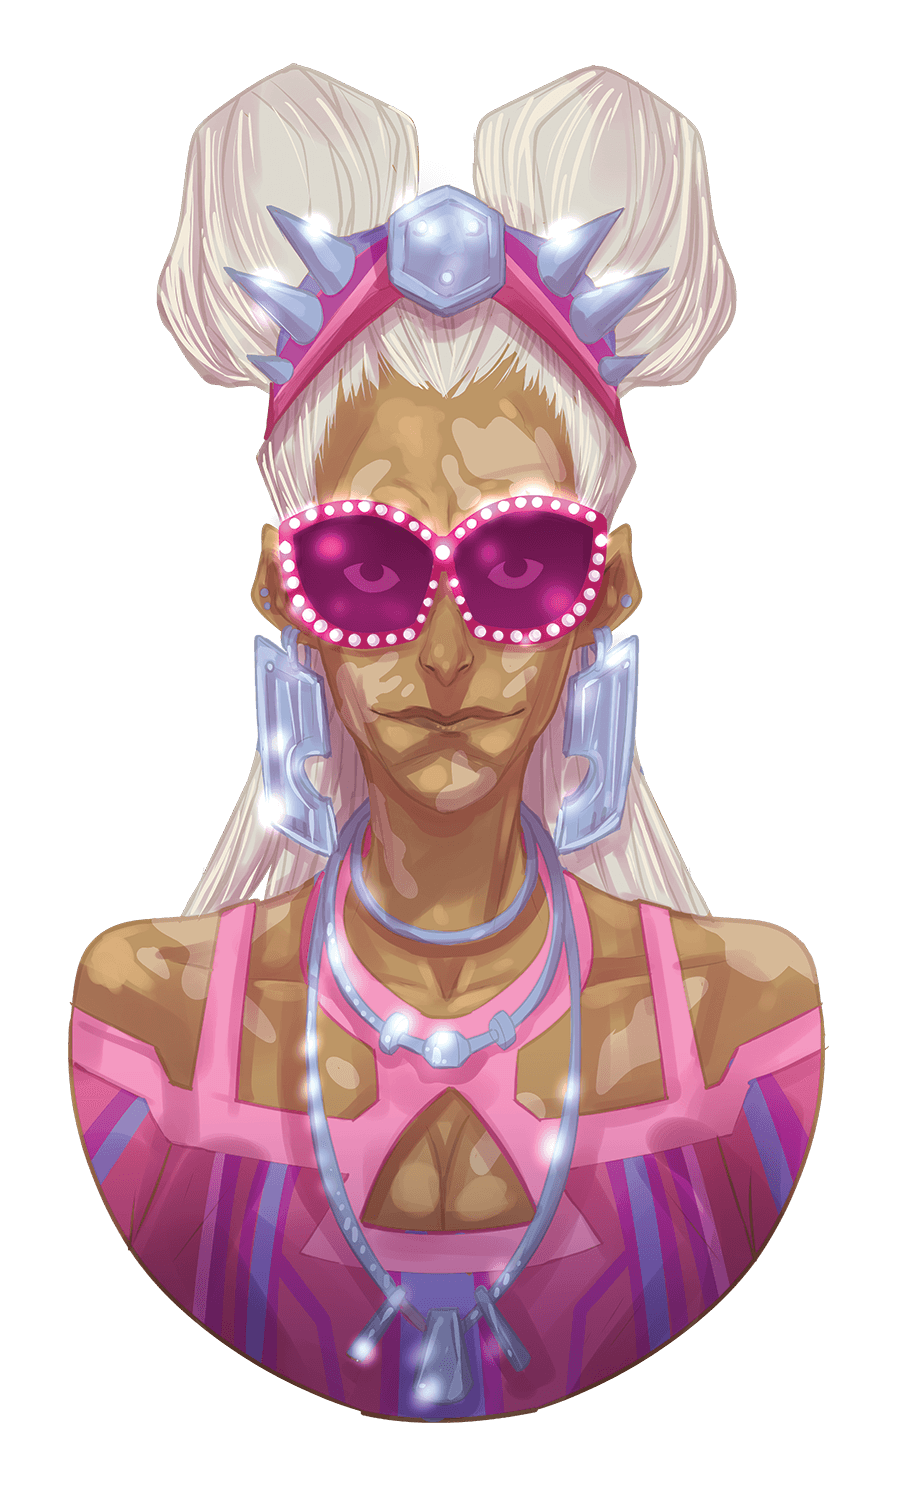 headshot of Lovely Ria, with long blonde hair pulled up into two buns, bright silver jewelry, and pink clothes